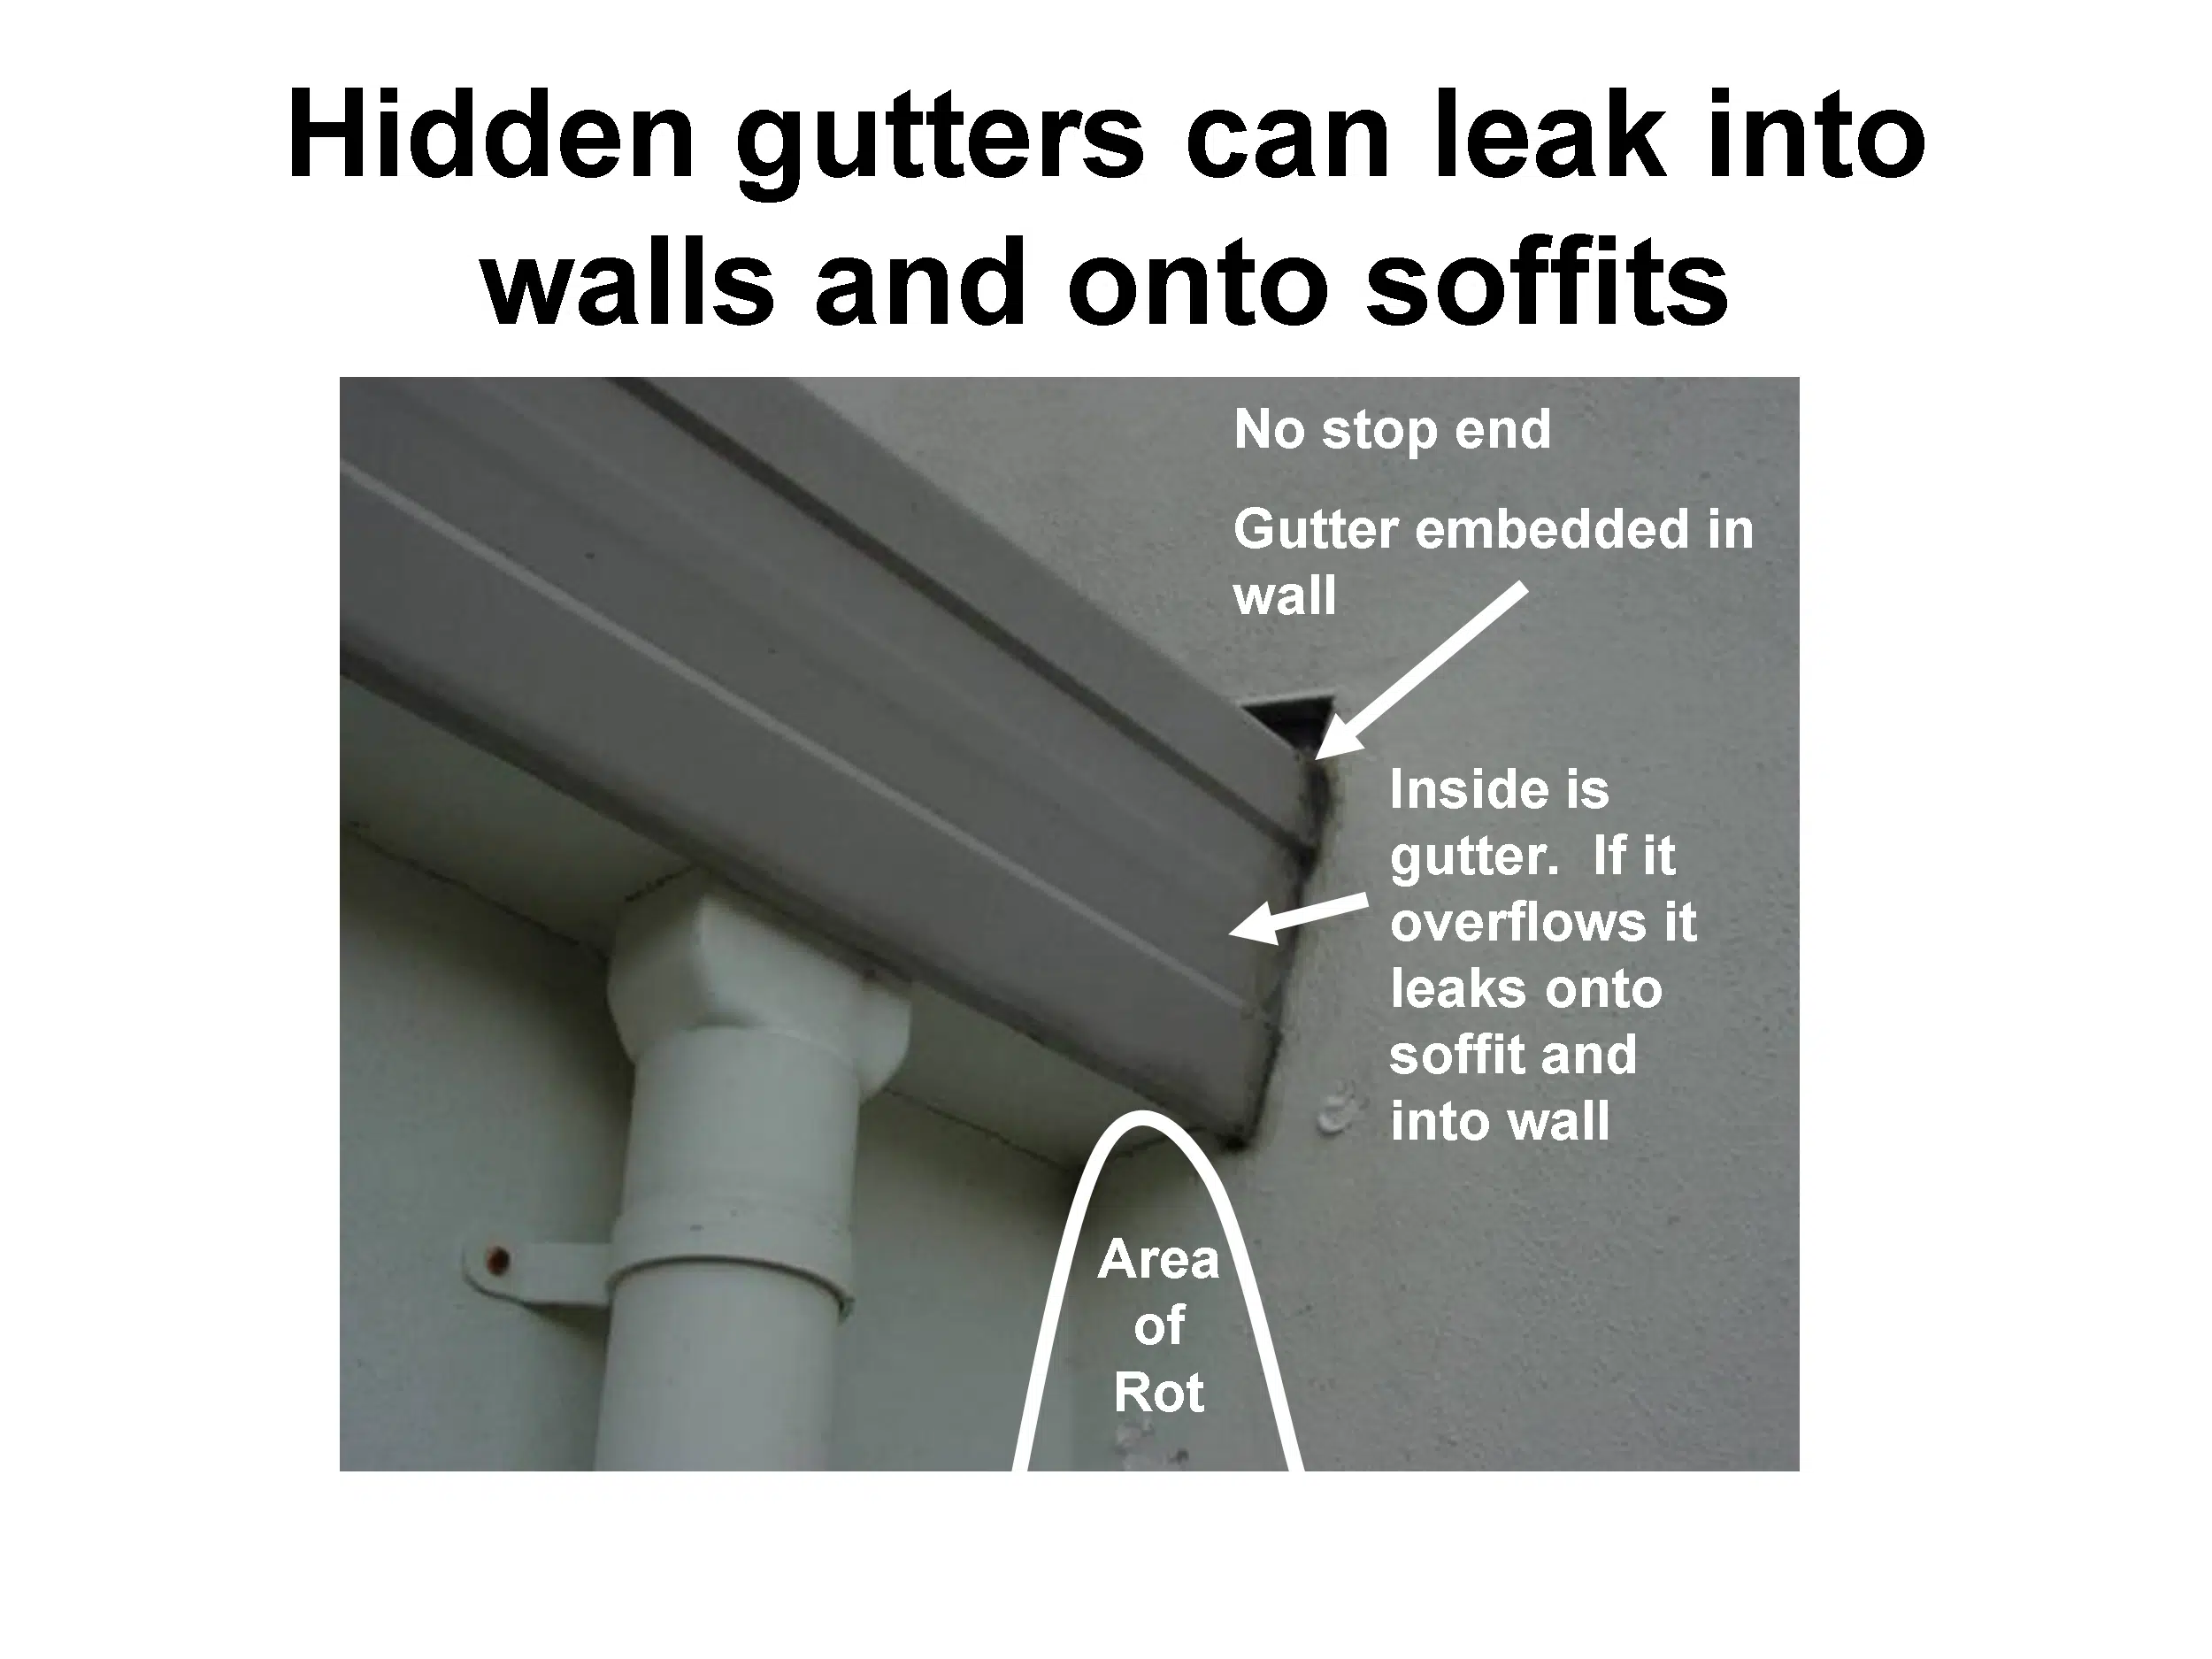 Plaster home gutters buried into walls need leak detection